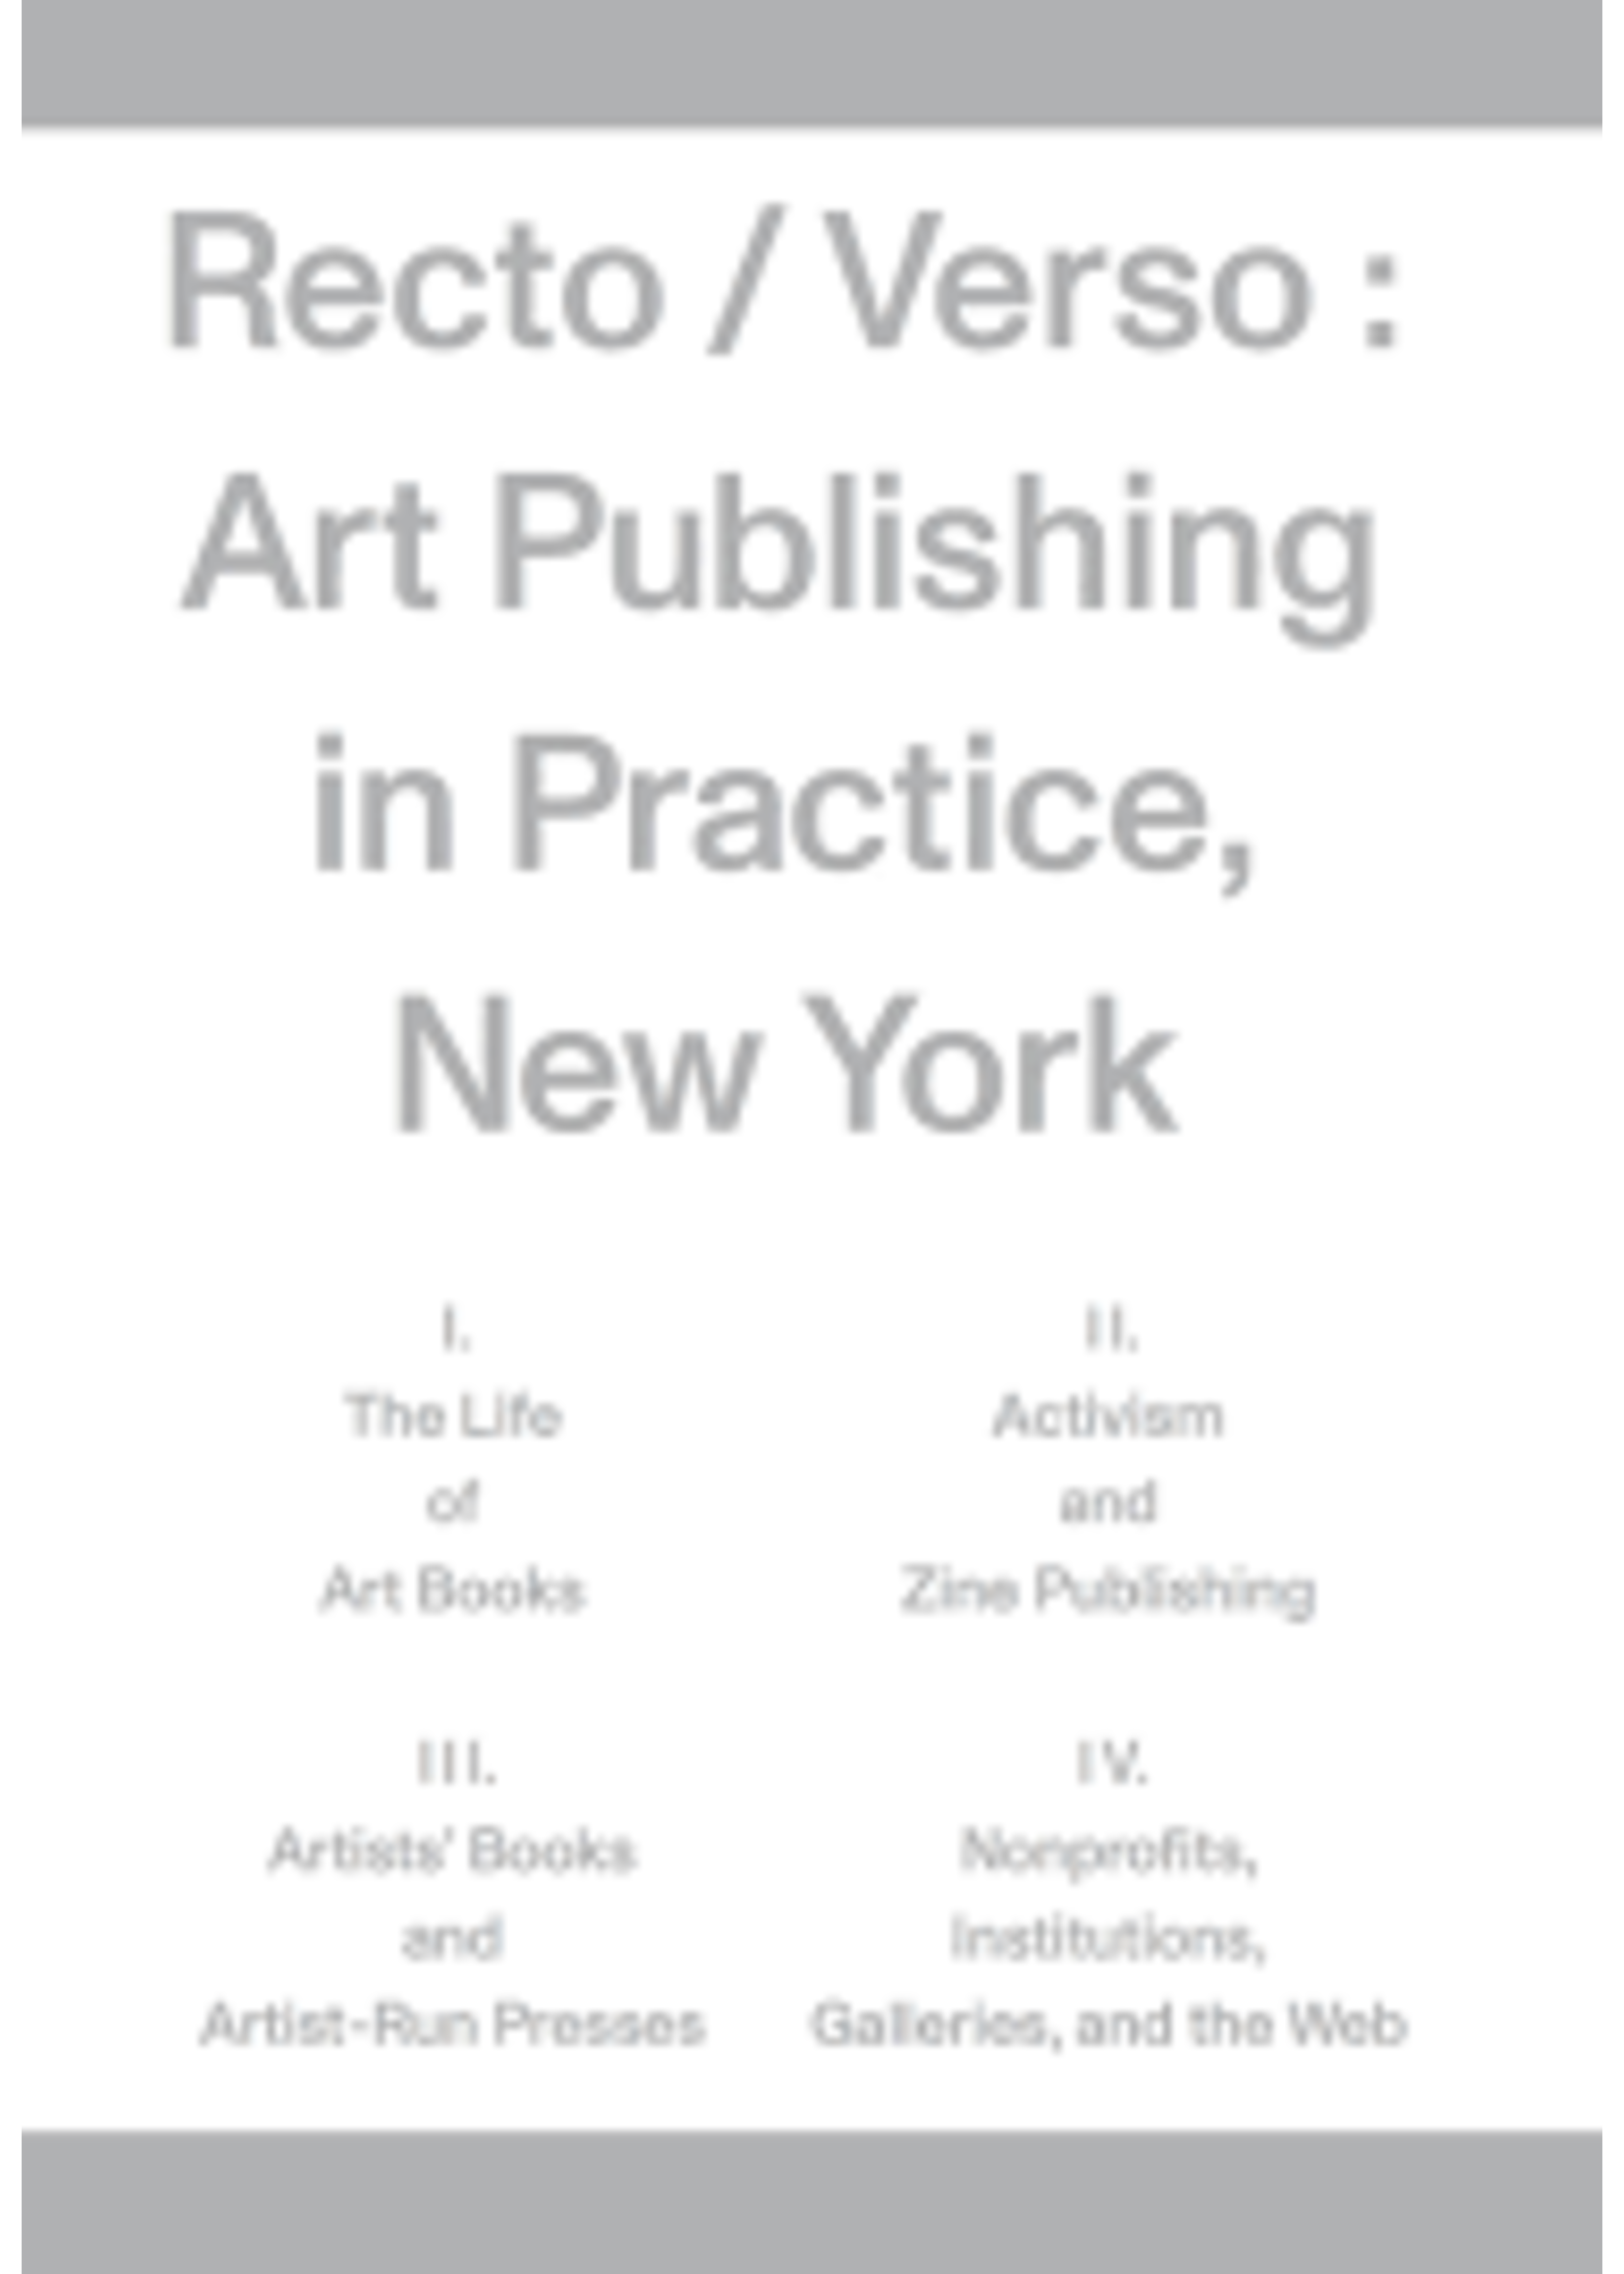 Hauser & Wirth Recto / Verso: Art Publishing in Practice, New York